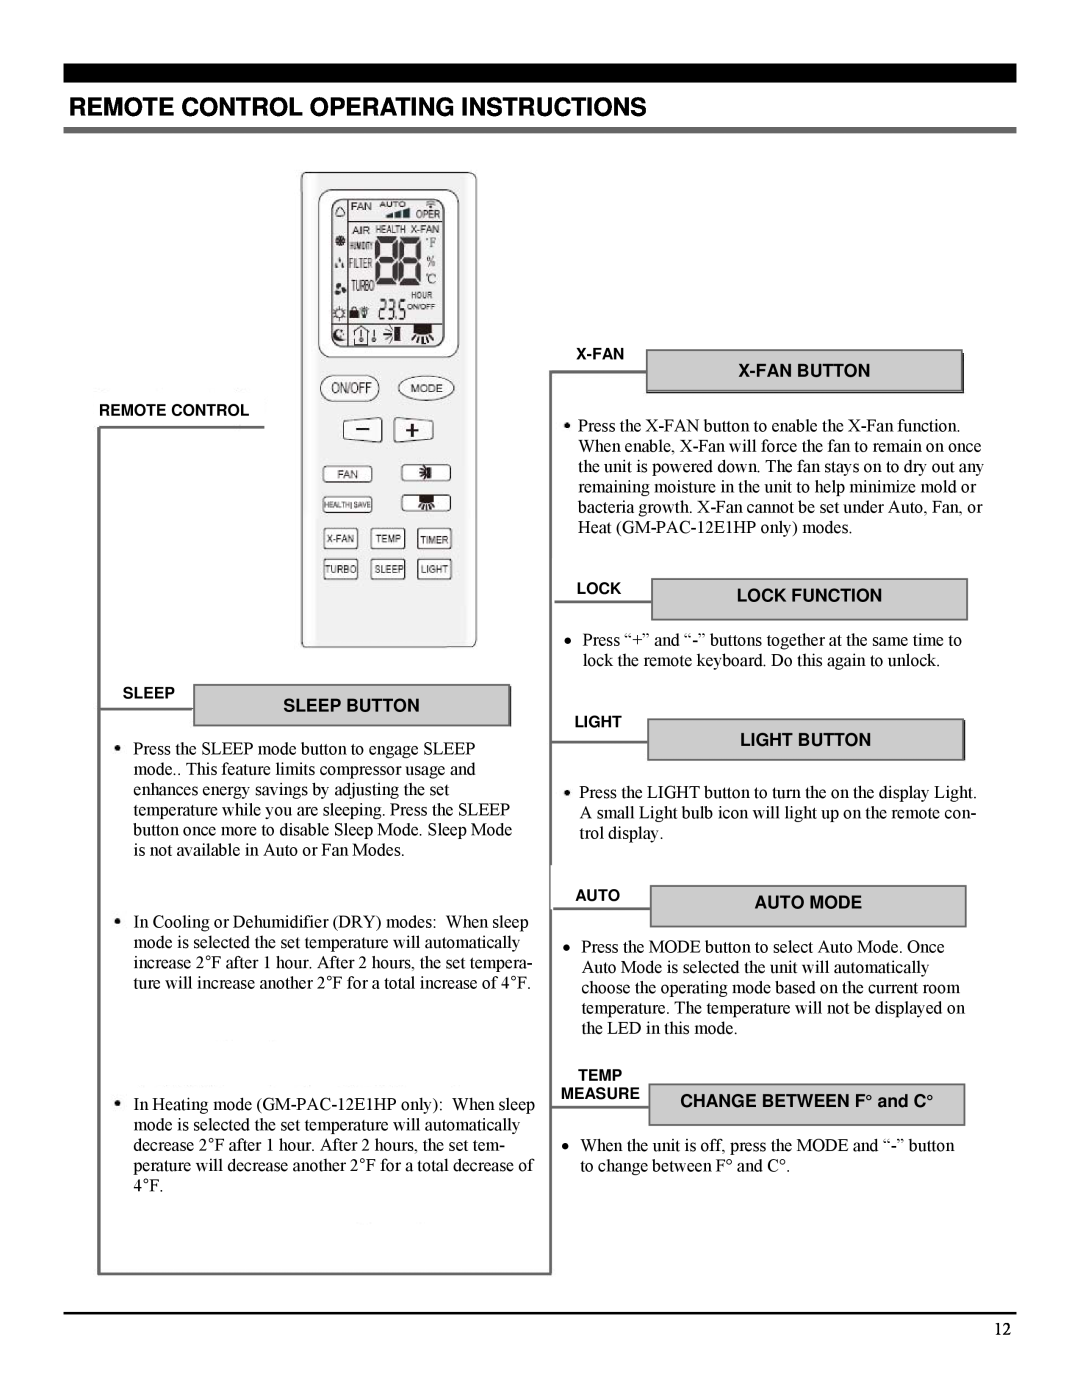 Soleus Air GM-PAC-12E1 manual Remote Control Operating Instructions, Sleep Button, X-Fanbutton, Lock Function, Light Button 